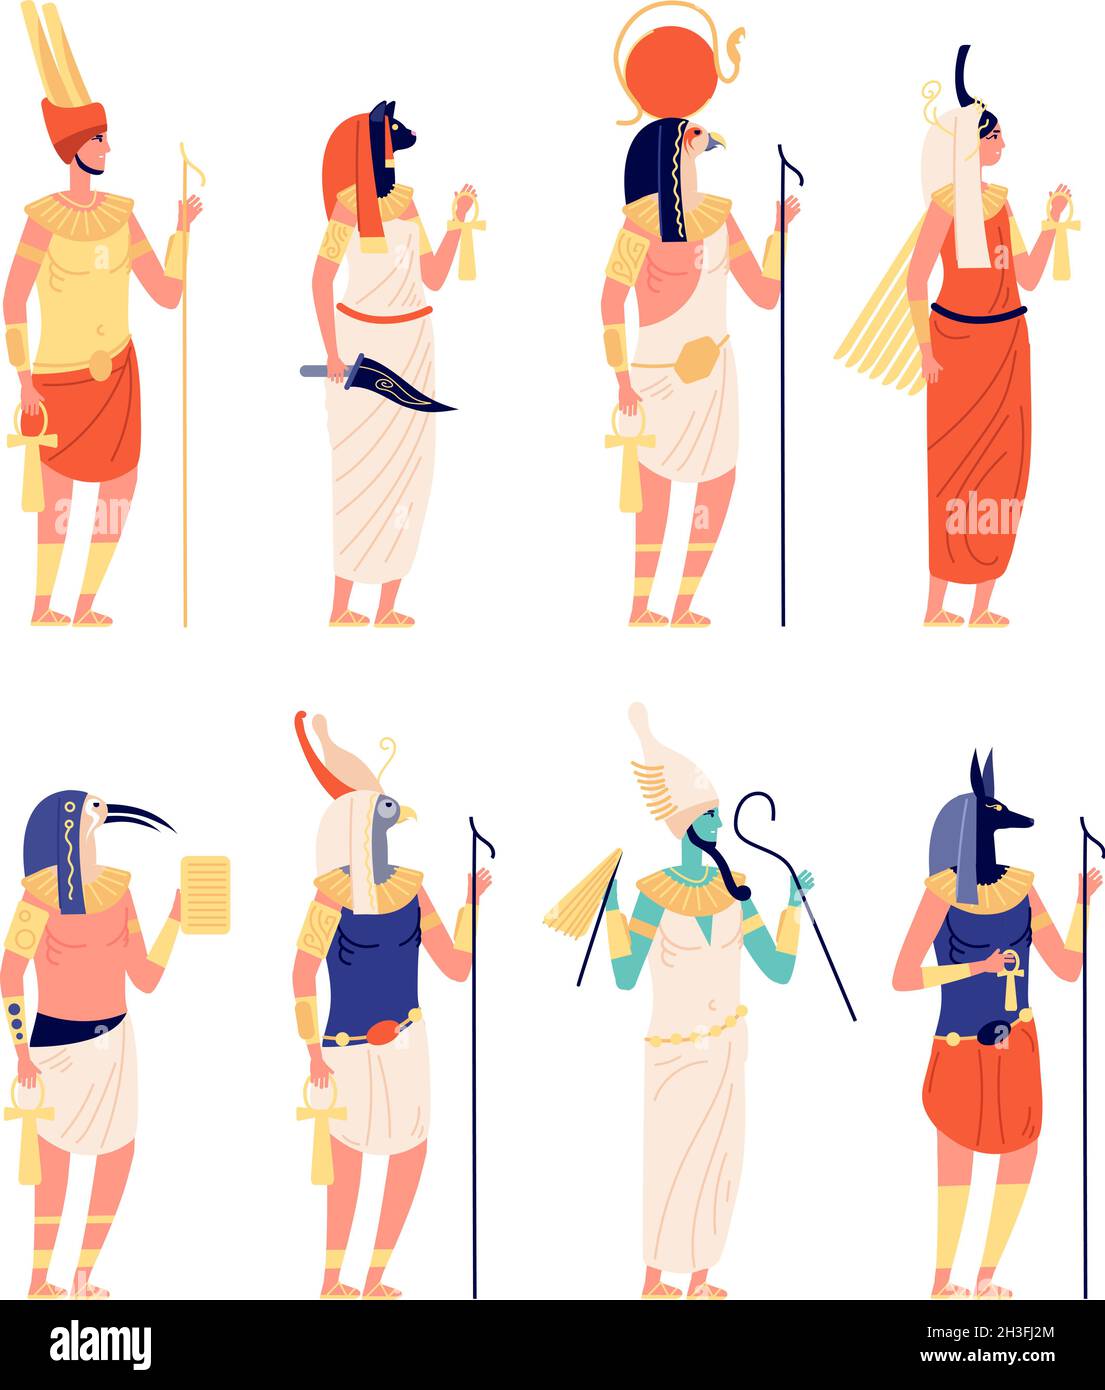 Egypt characters. Ancients egyptian god, old culture goddess. Osiris horus anubis statues, cartoon historical symbols utter vector collection Stock Vector